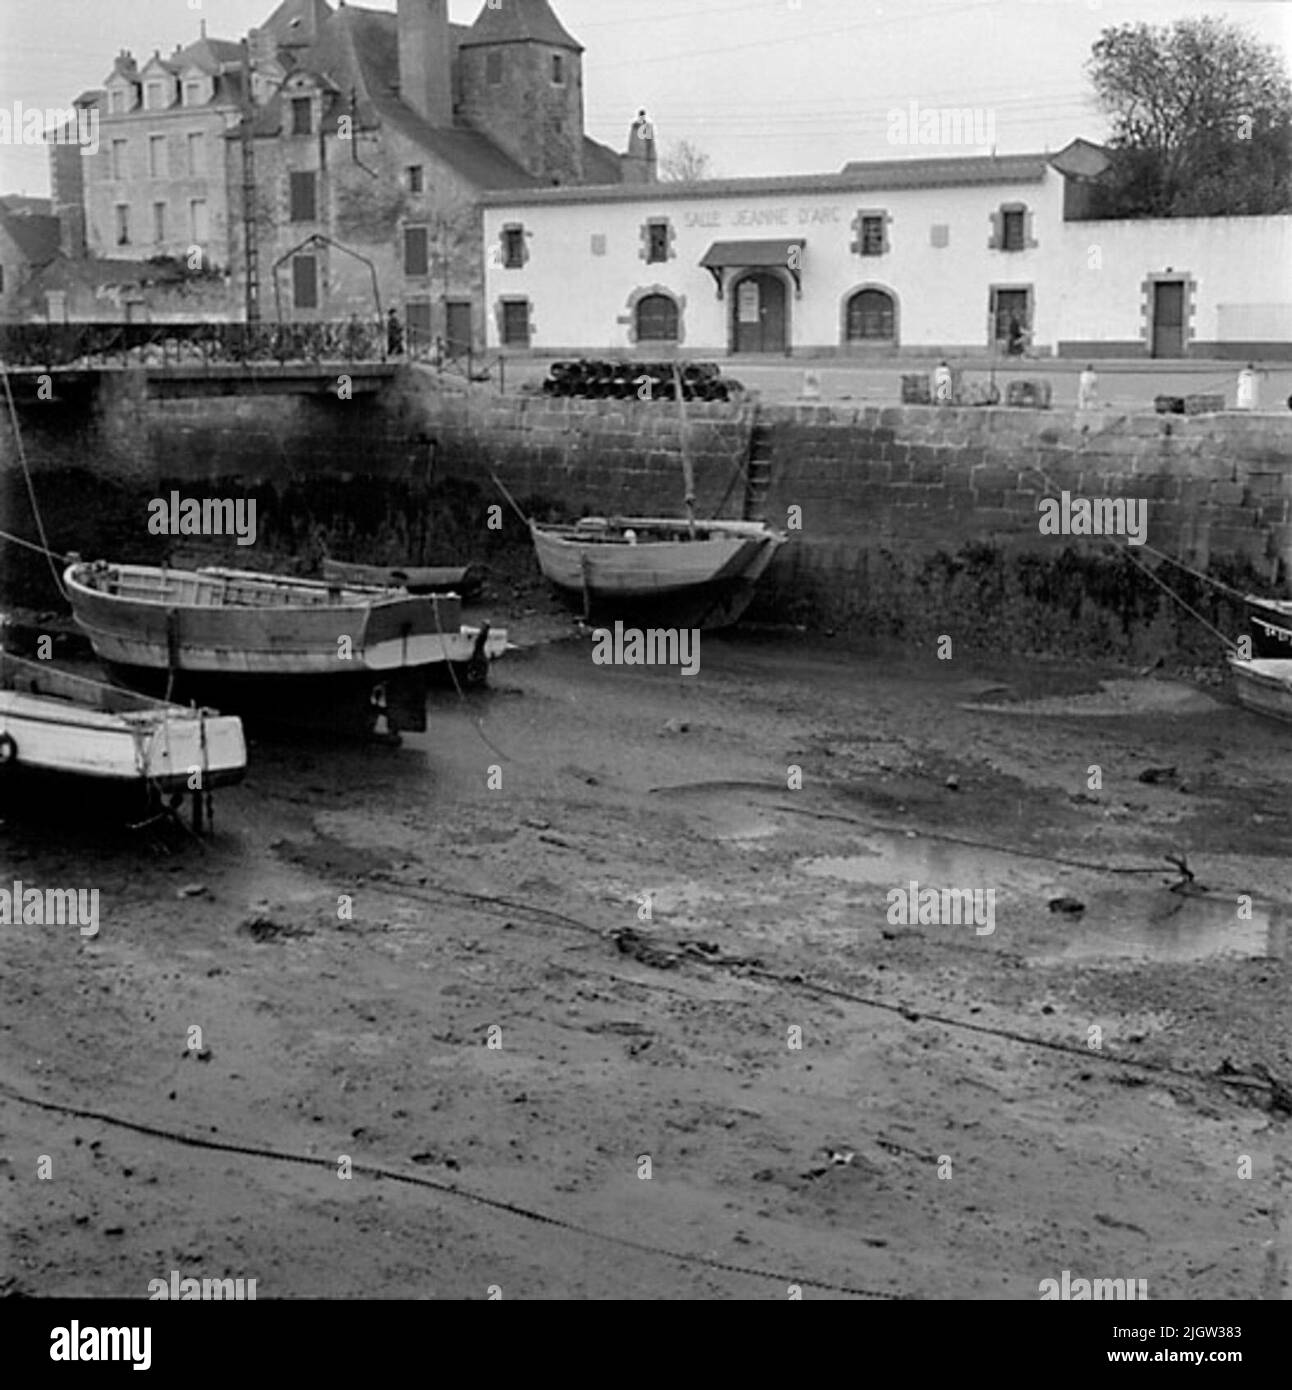 9. France. Photo journal is available at B.M.A. + Photo albums. Acquisition: Books and archive materials. Photos taken 1959-10-17.12 Pictures in series. According to notes: France. Atlantic coast, Le Croisic, 17/10 -59. Boats in the harbor channel at ebb. A number of boats are located in a port in a community. There is low tide so the boats are at the bottom of the harbor basin. Stock Photo